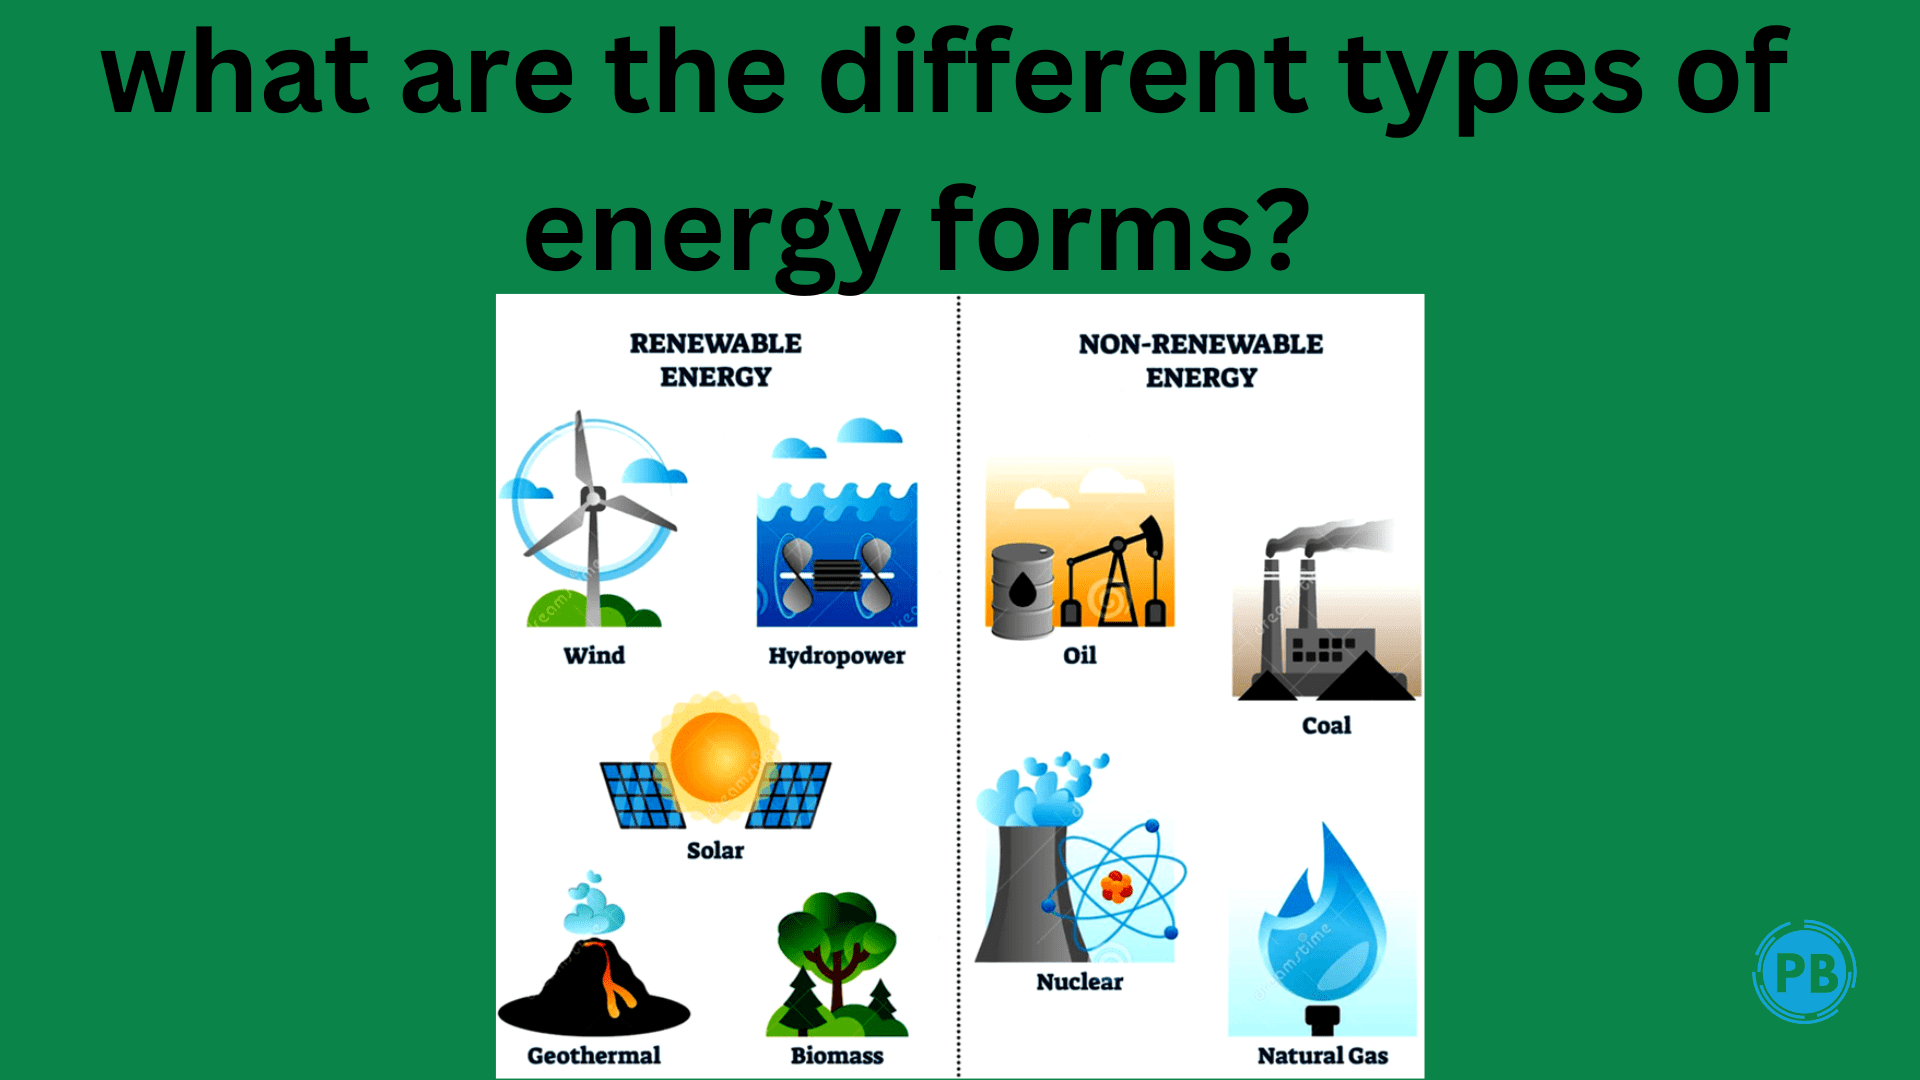 what are the different types of energy forms?